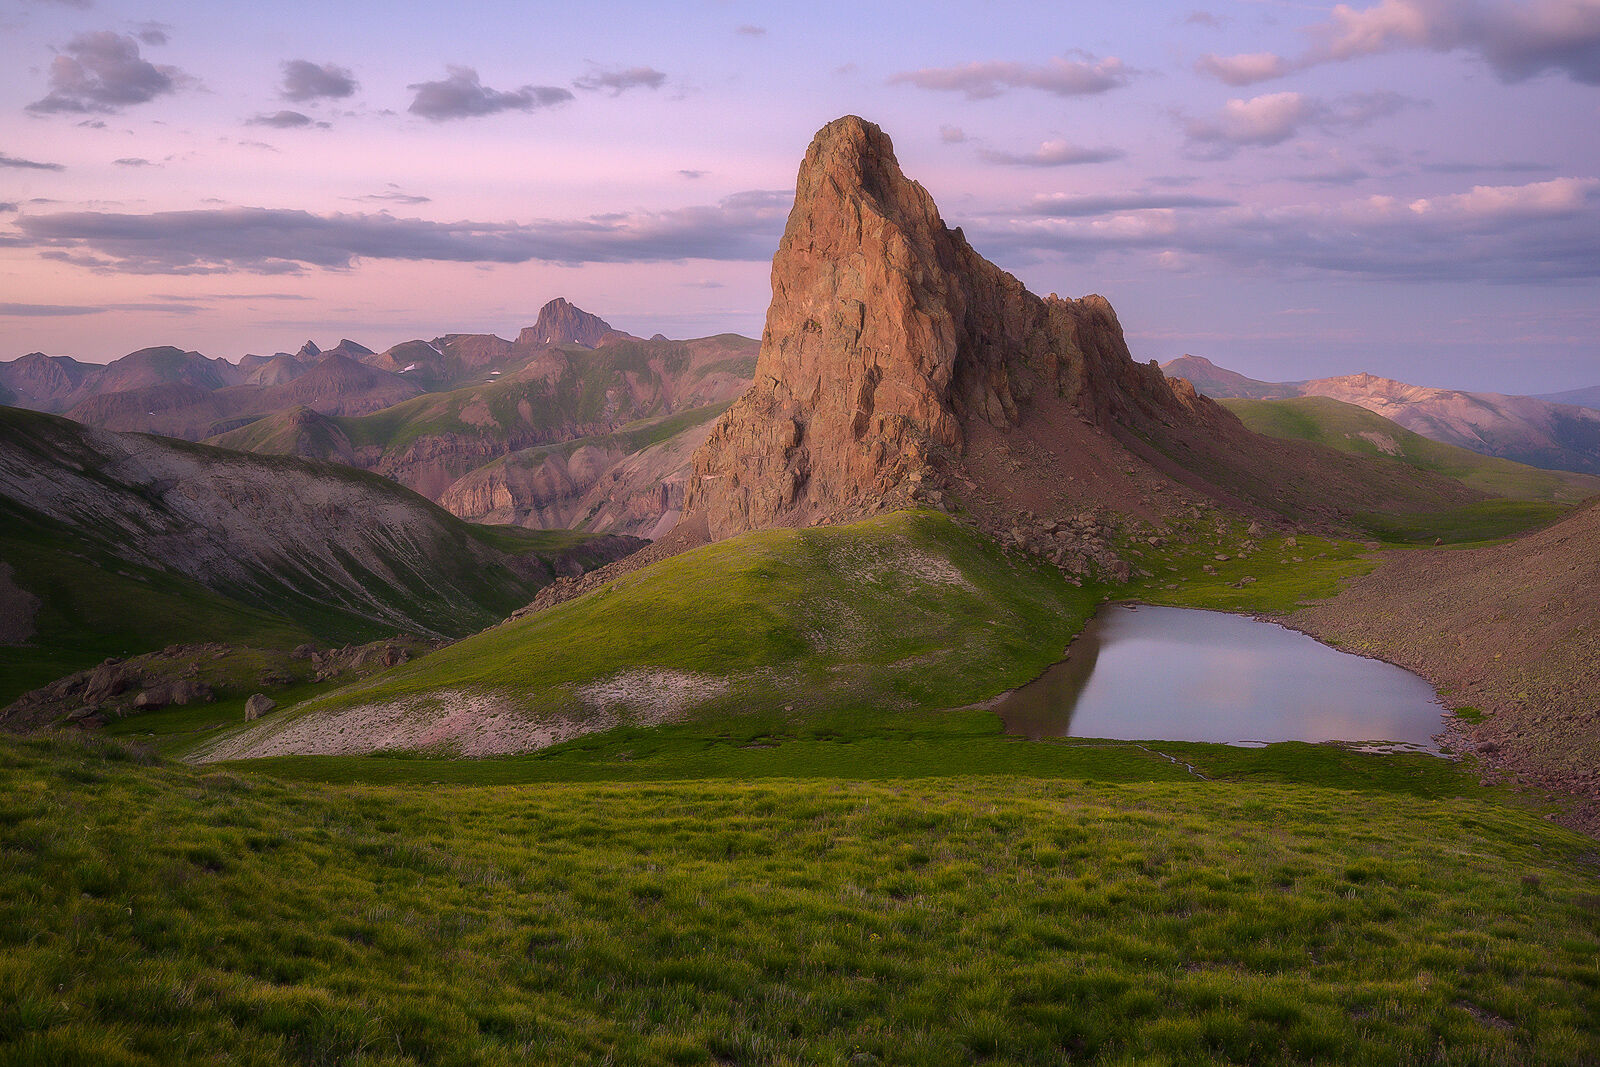 Prominent mountain peak stands with green grass surround it at sunset with pink clouds in the sky and a horizon full of mountain peaks.